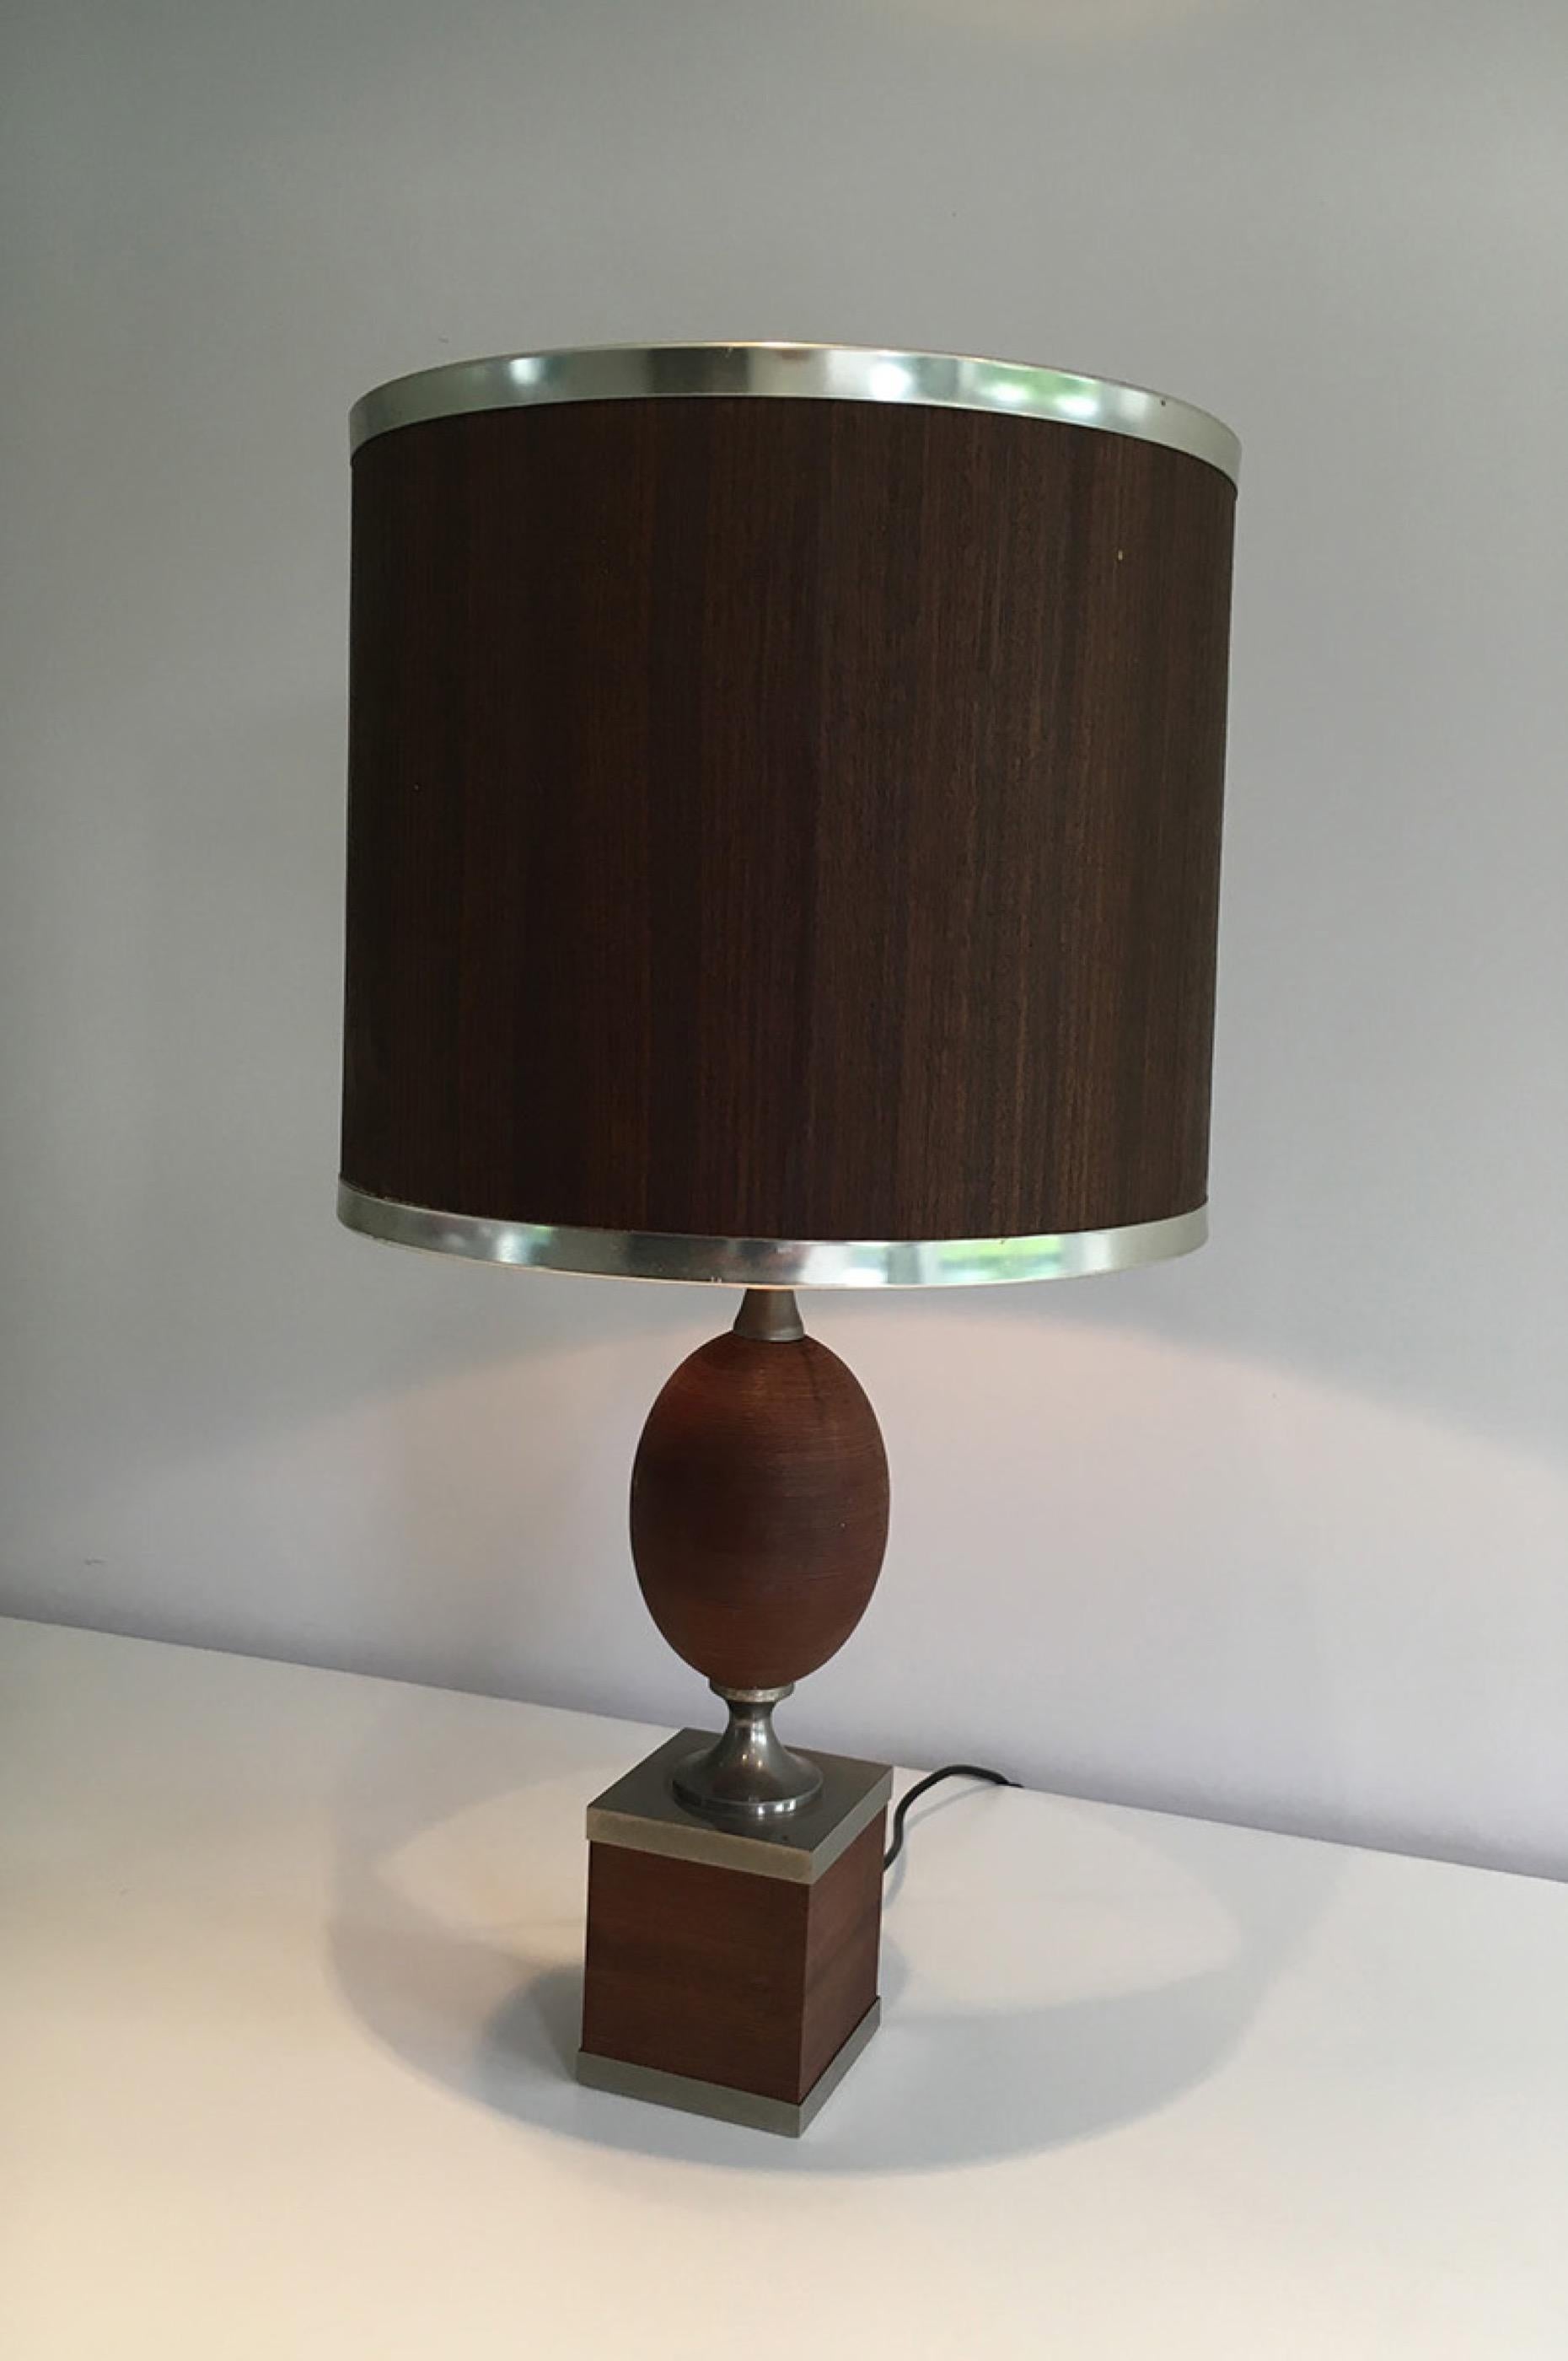 This very nice and rare egg table lamp is made of wood and brushed steel with a thin wooden shade. This is a beautiful French work, in the style of Philippe Barbier, circa 1970.